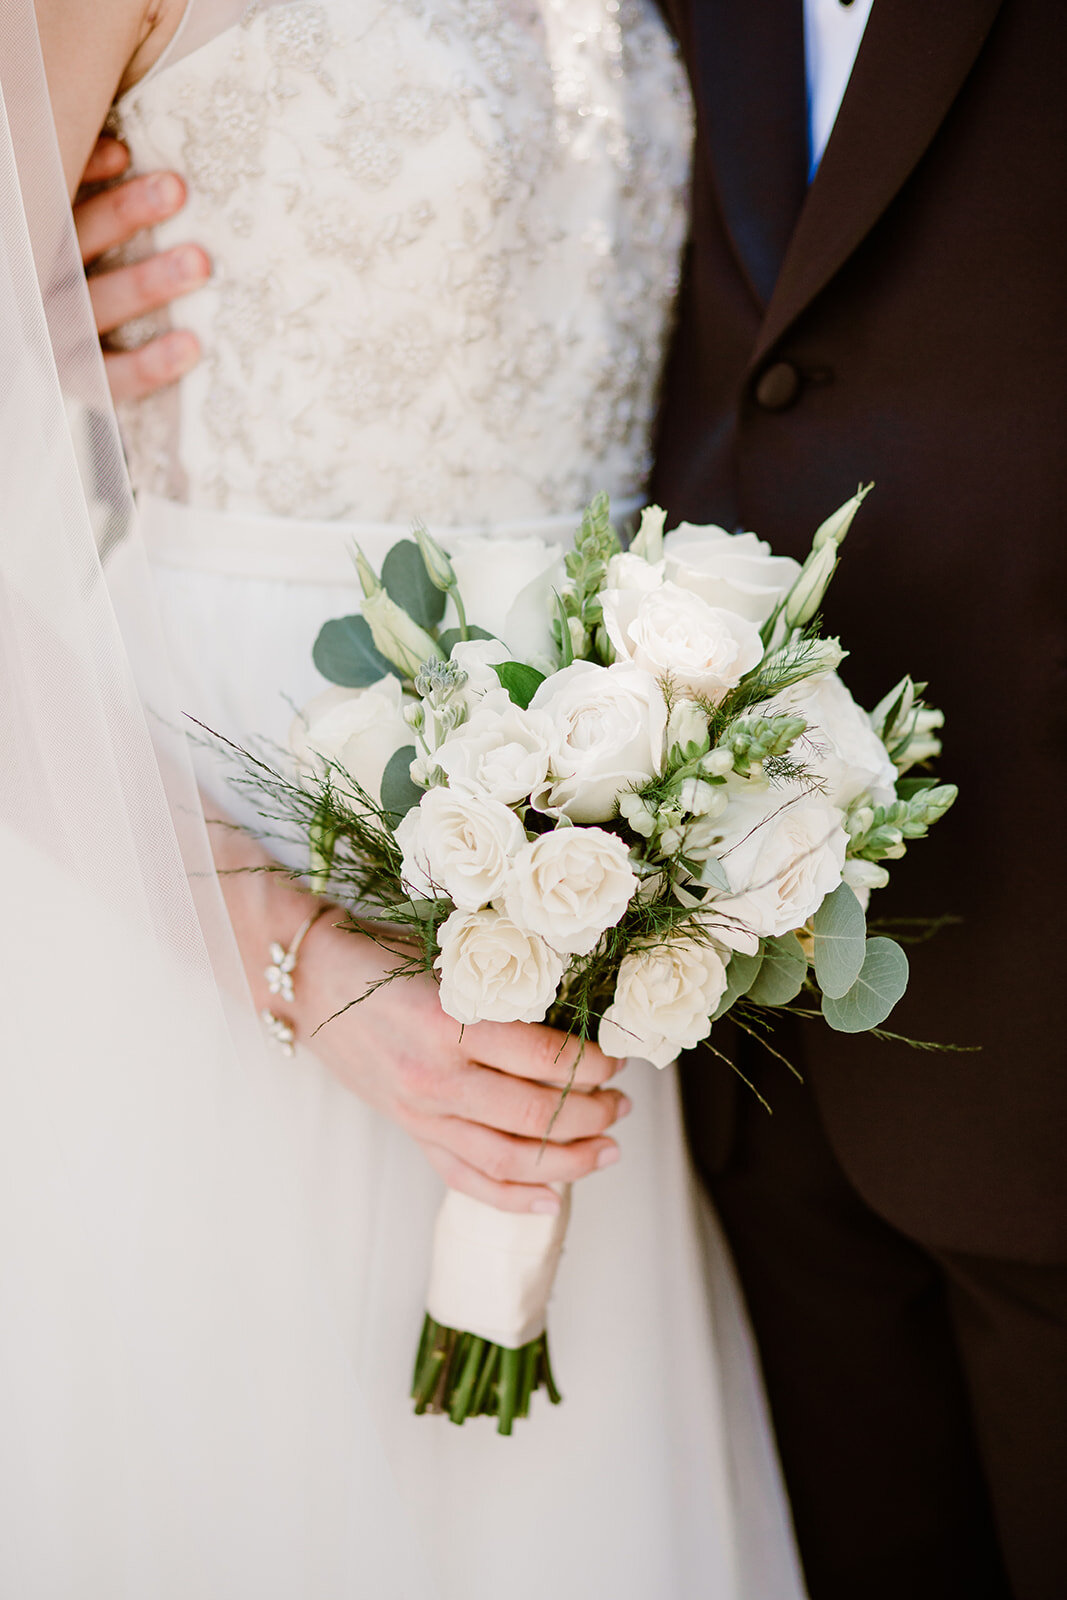  White Rose Bouquet | Bride and Groom portraits | Sarah Mattozzi Photography | Ball Gown Wedding dress and Black Tux | Outdoor Classic Wedding at Third Church and Veritas School | Richmond Wedding Photographer 